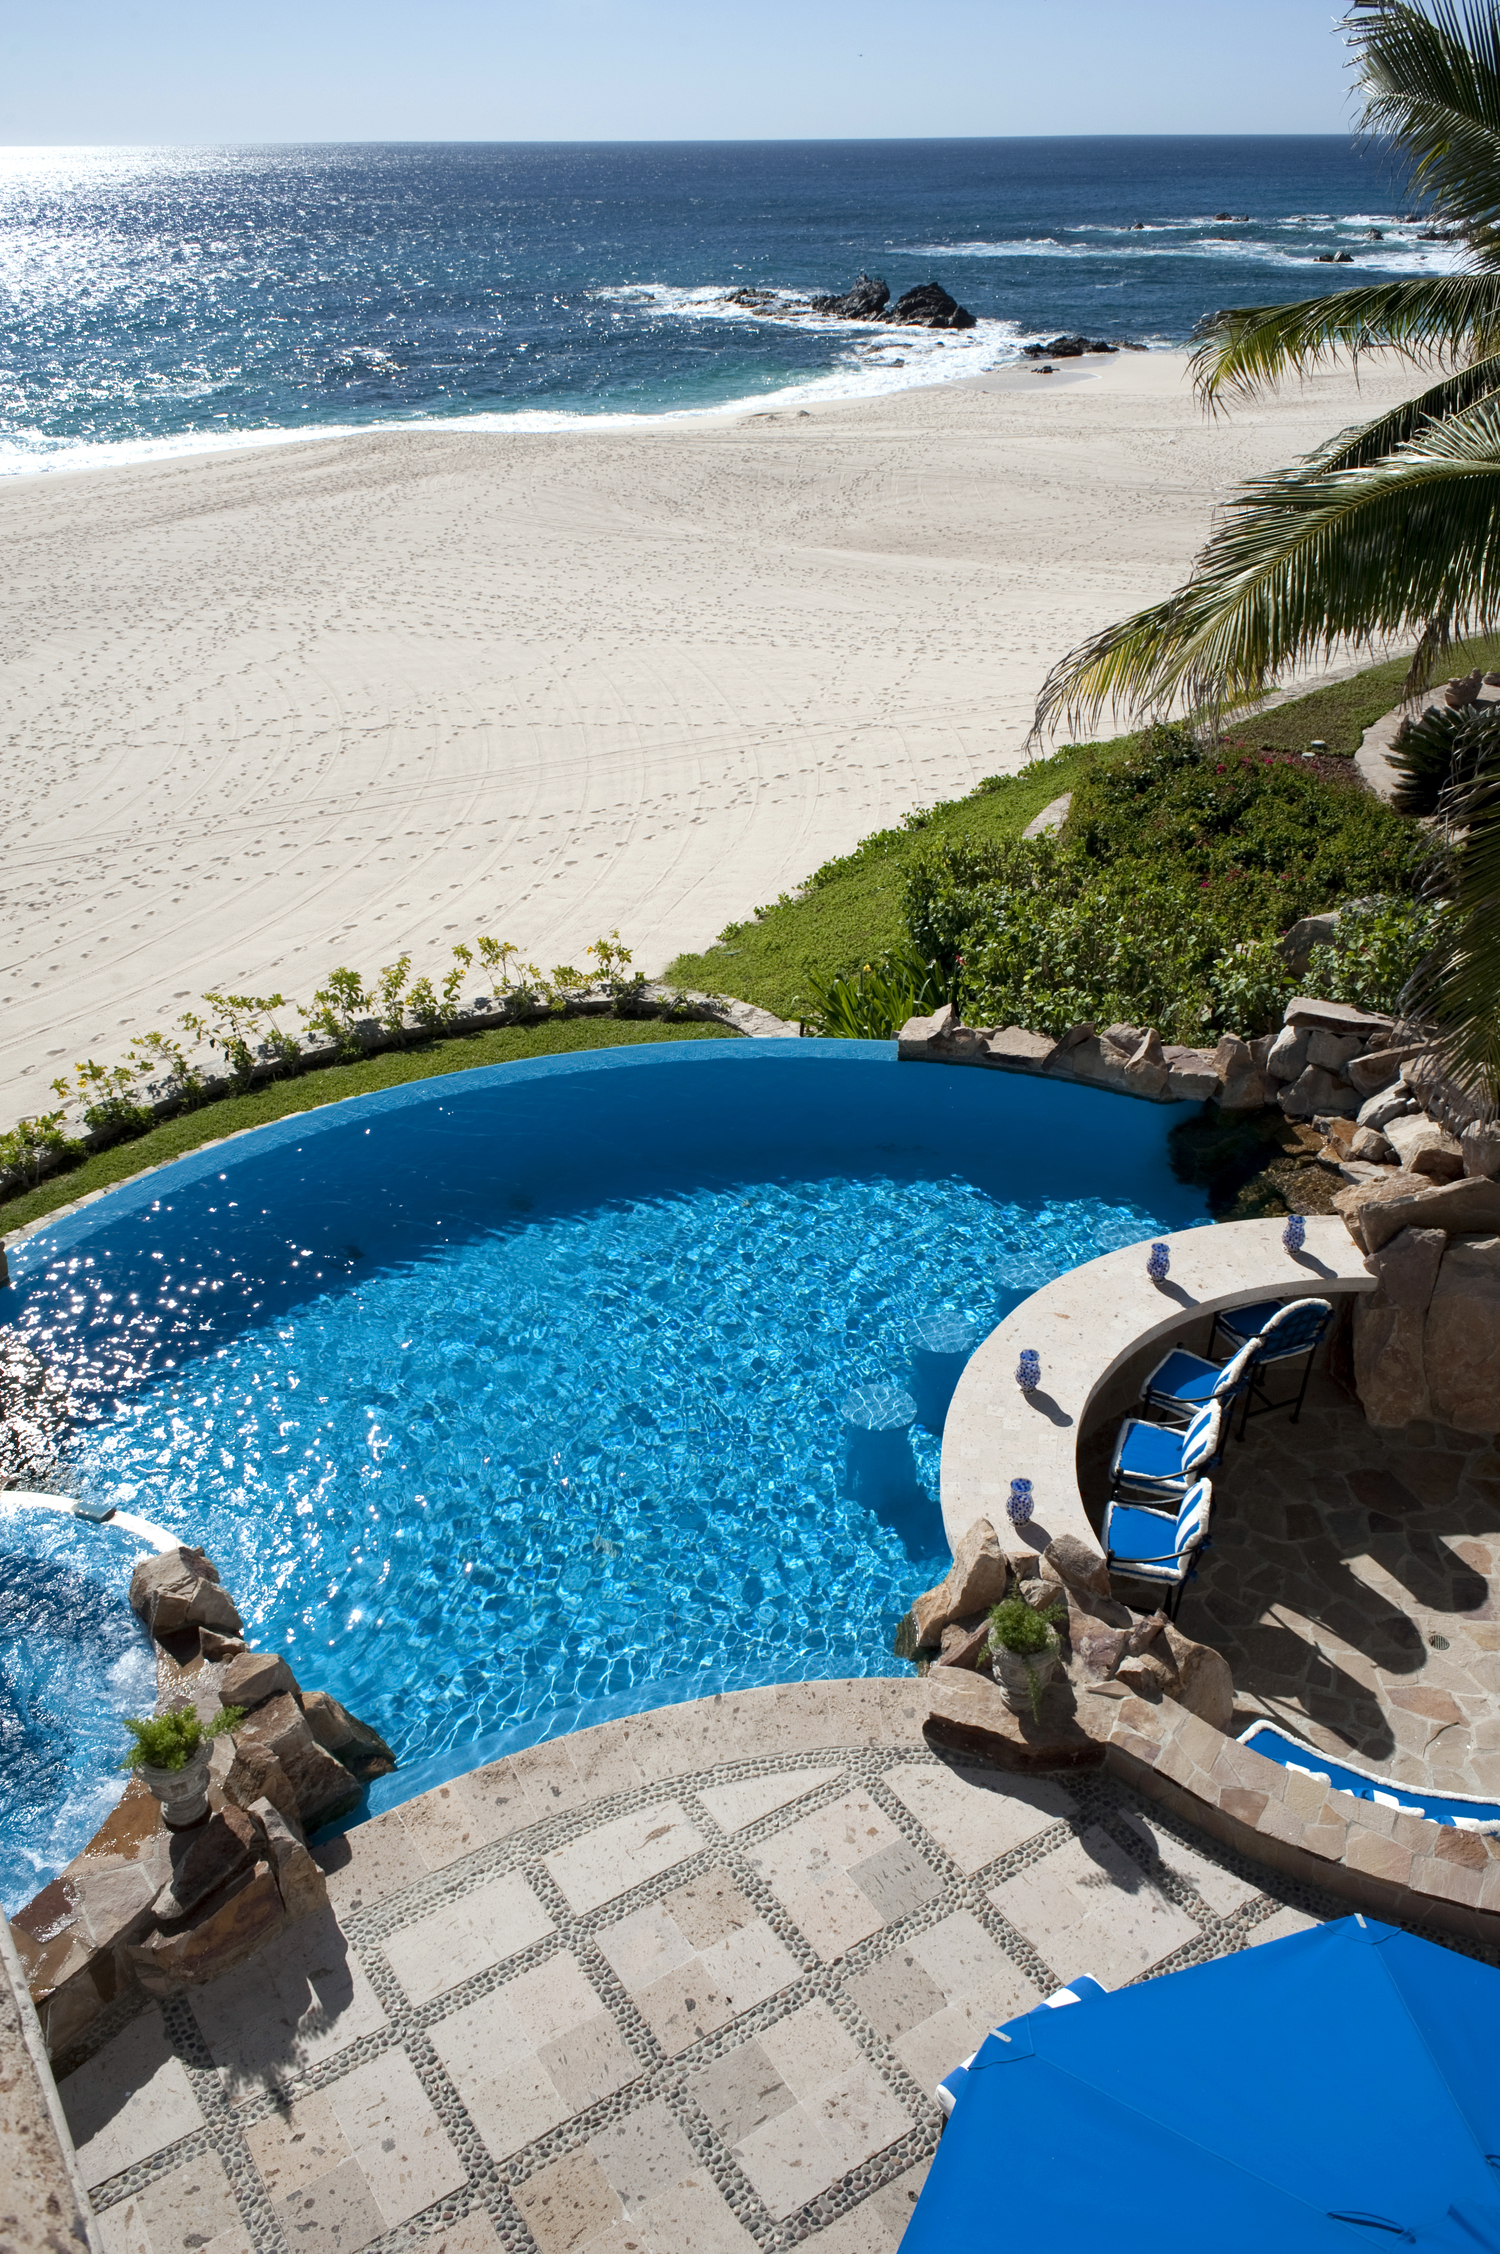 Pool and Beach View from upper deck.jpg